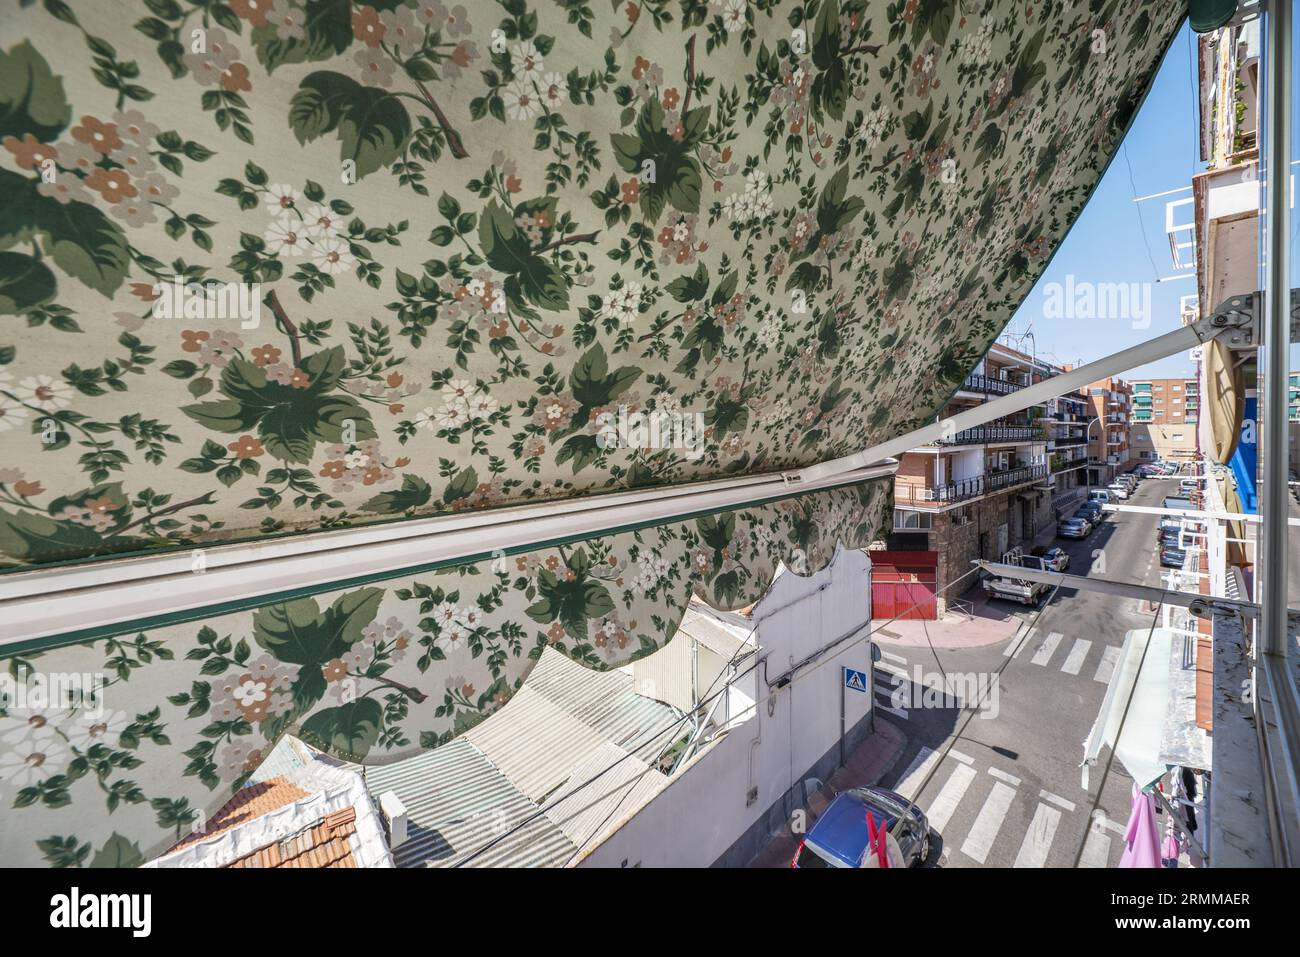 Views of the street from a window with an extensible awning of printed fabric Stock Photo